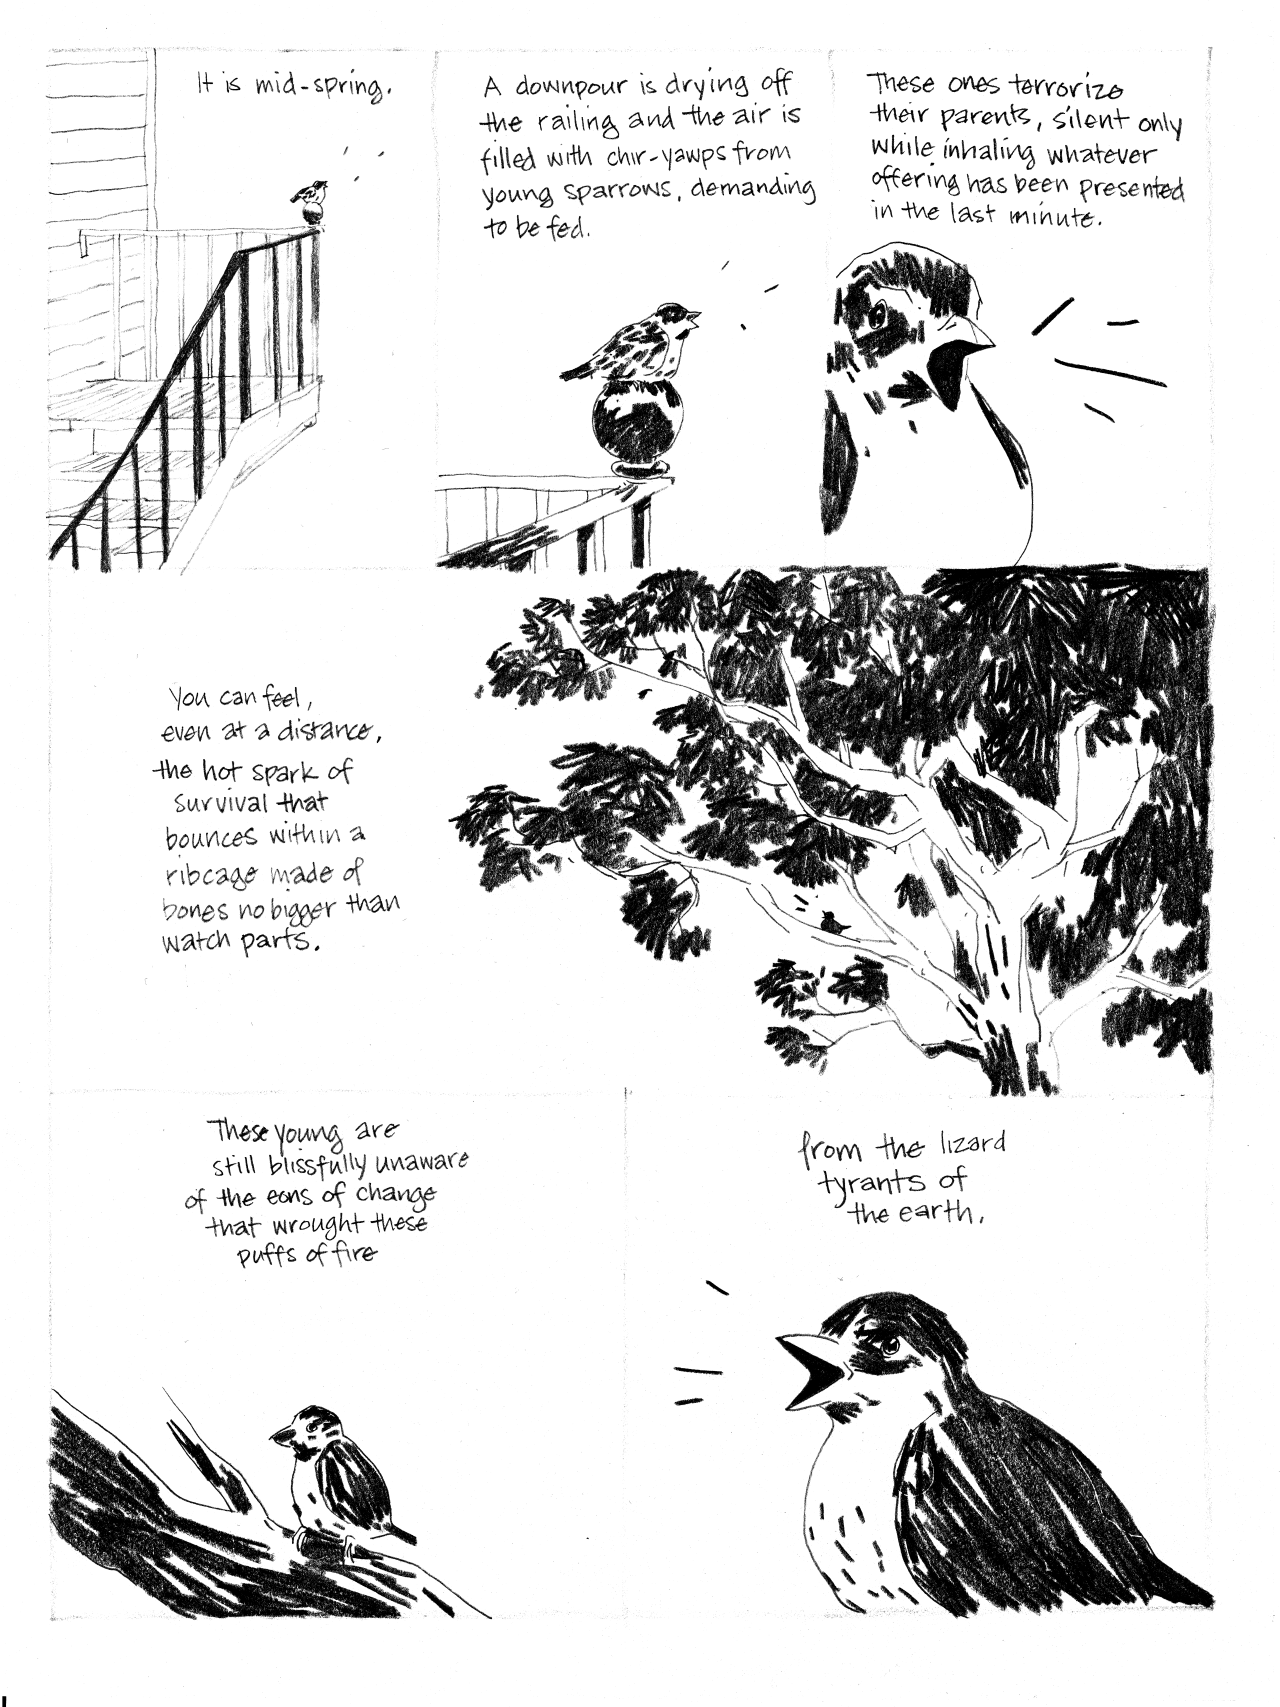 In Pieces: Someplace Which I Call Home (2/4) - Page 2